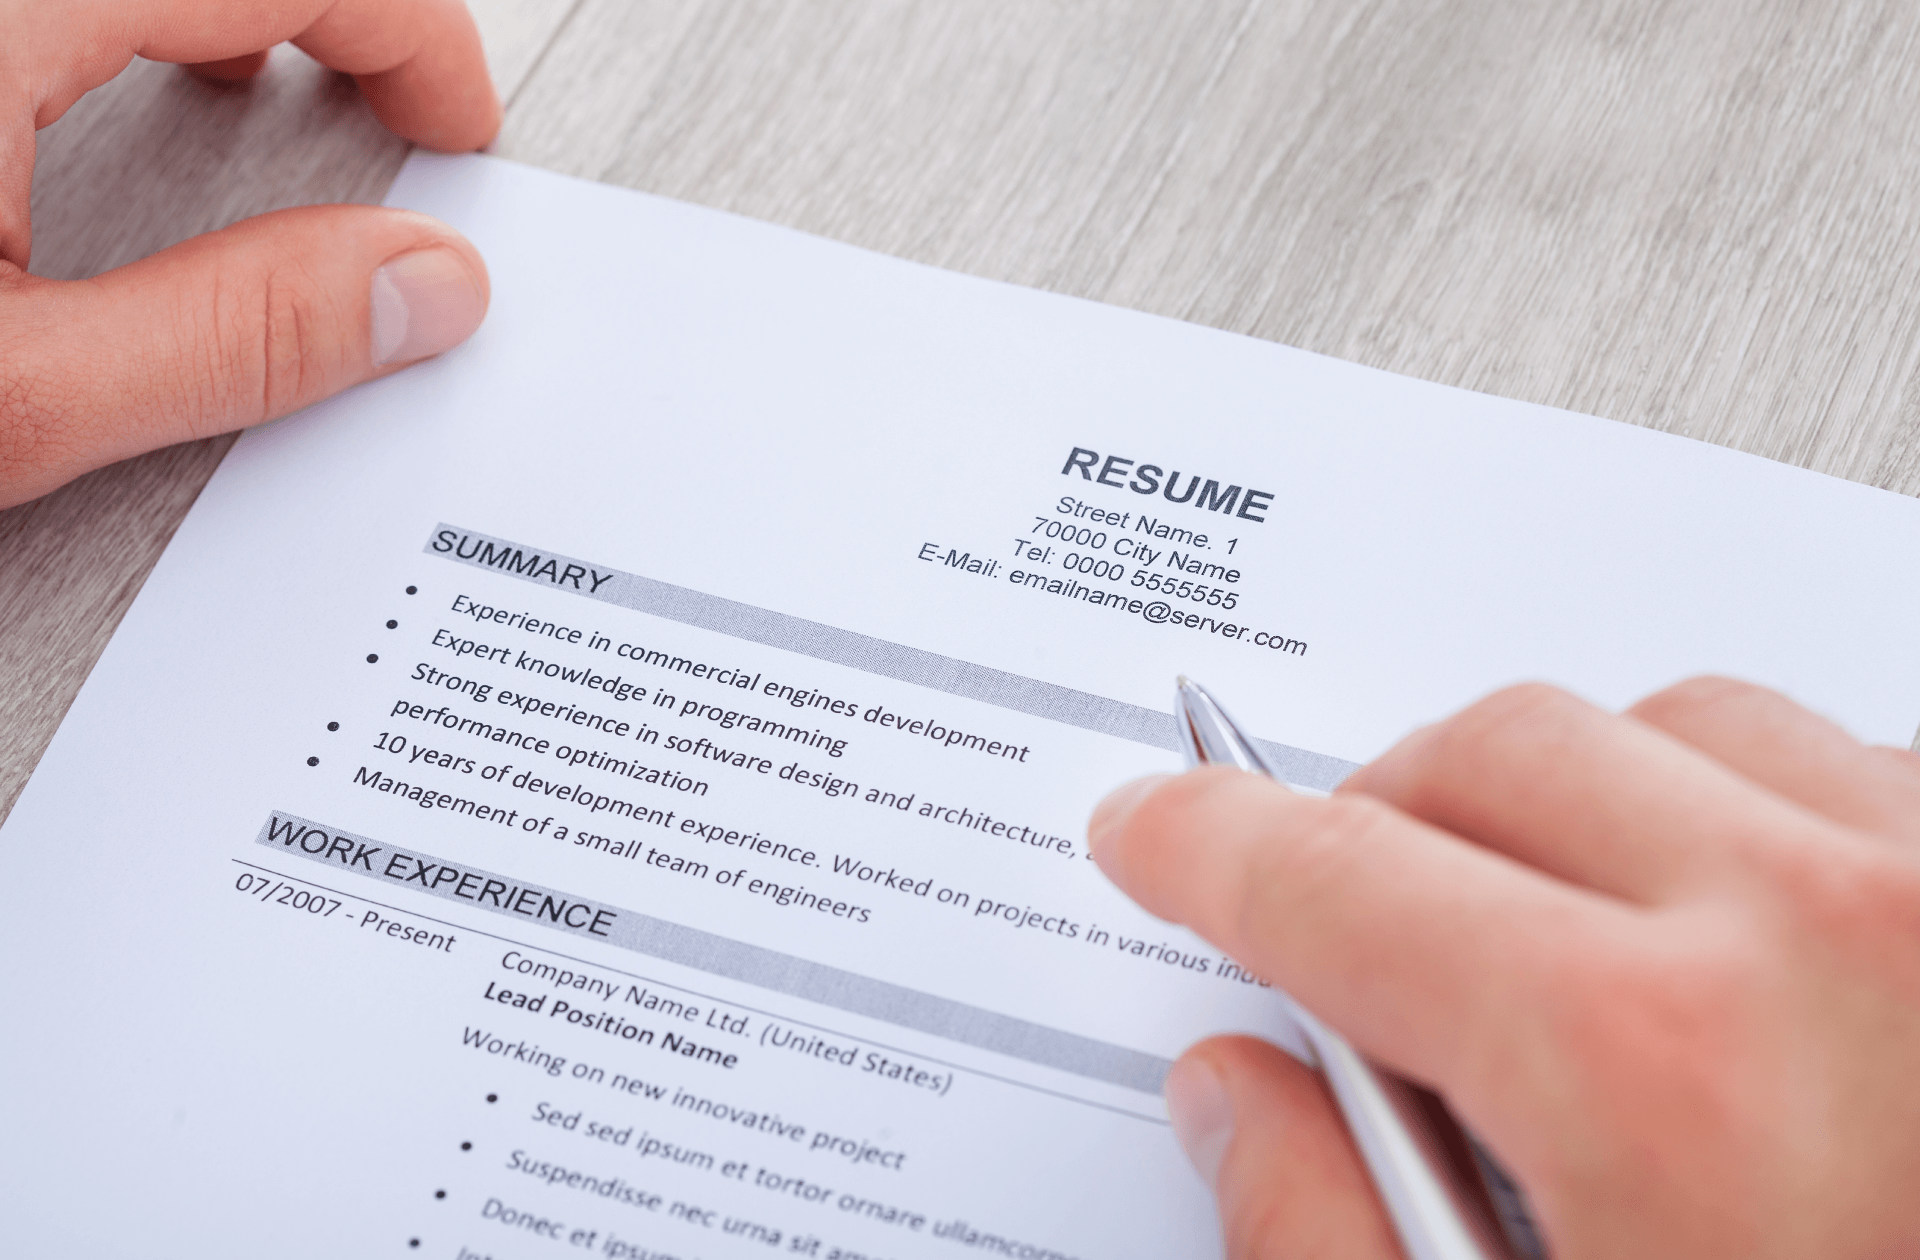 The Ultimate Resume Guide for Landing Top Jobs